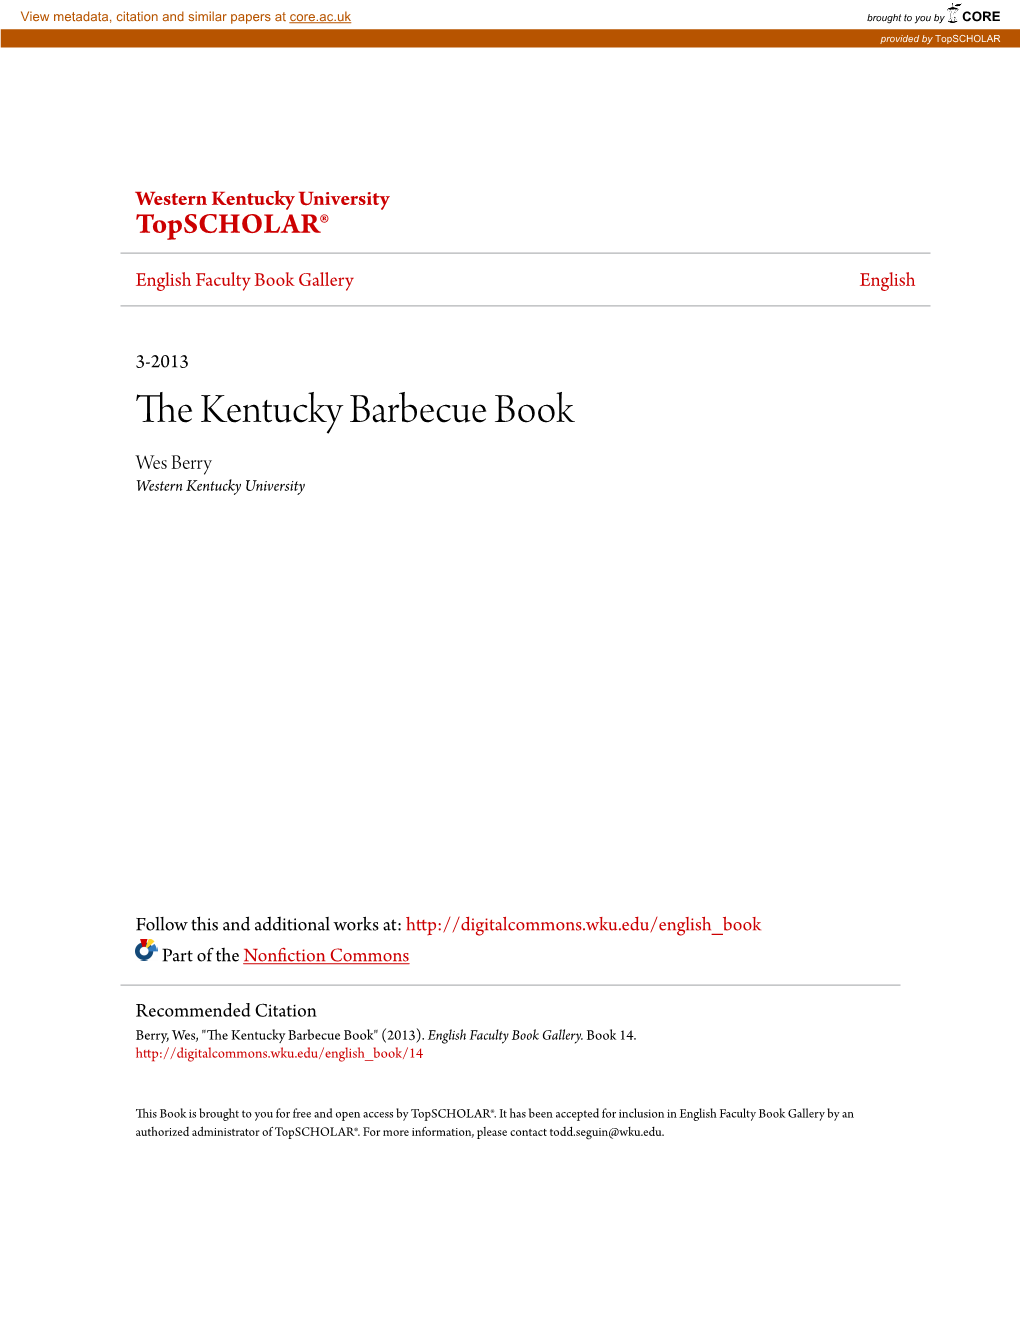 The Kentucky Barbecue Book Wes Berry Western Kentucky University